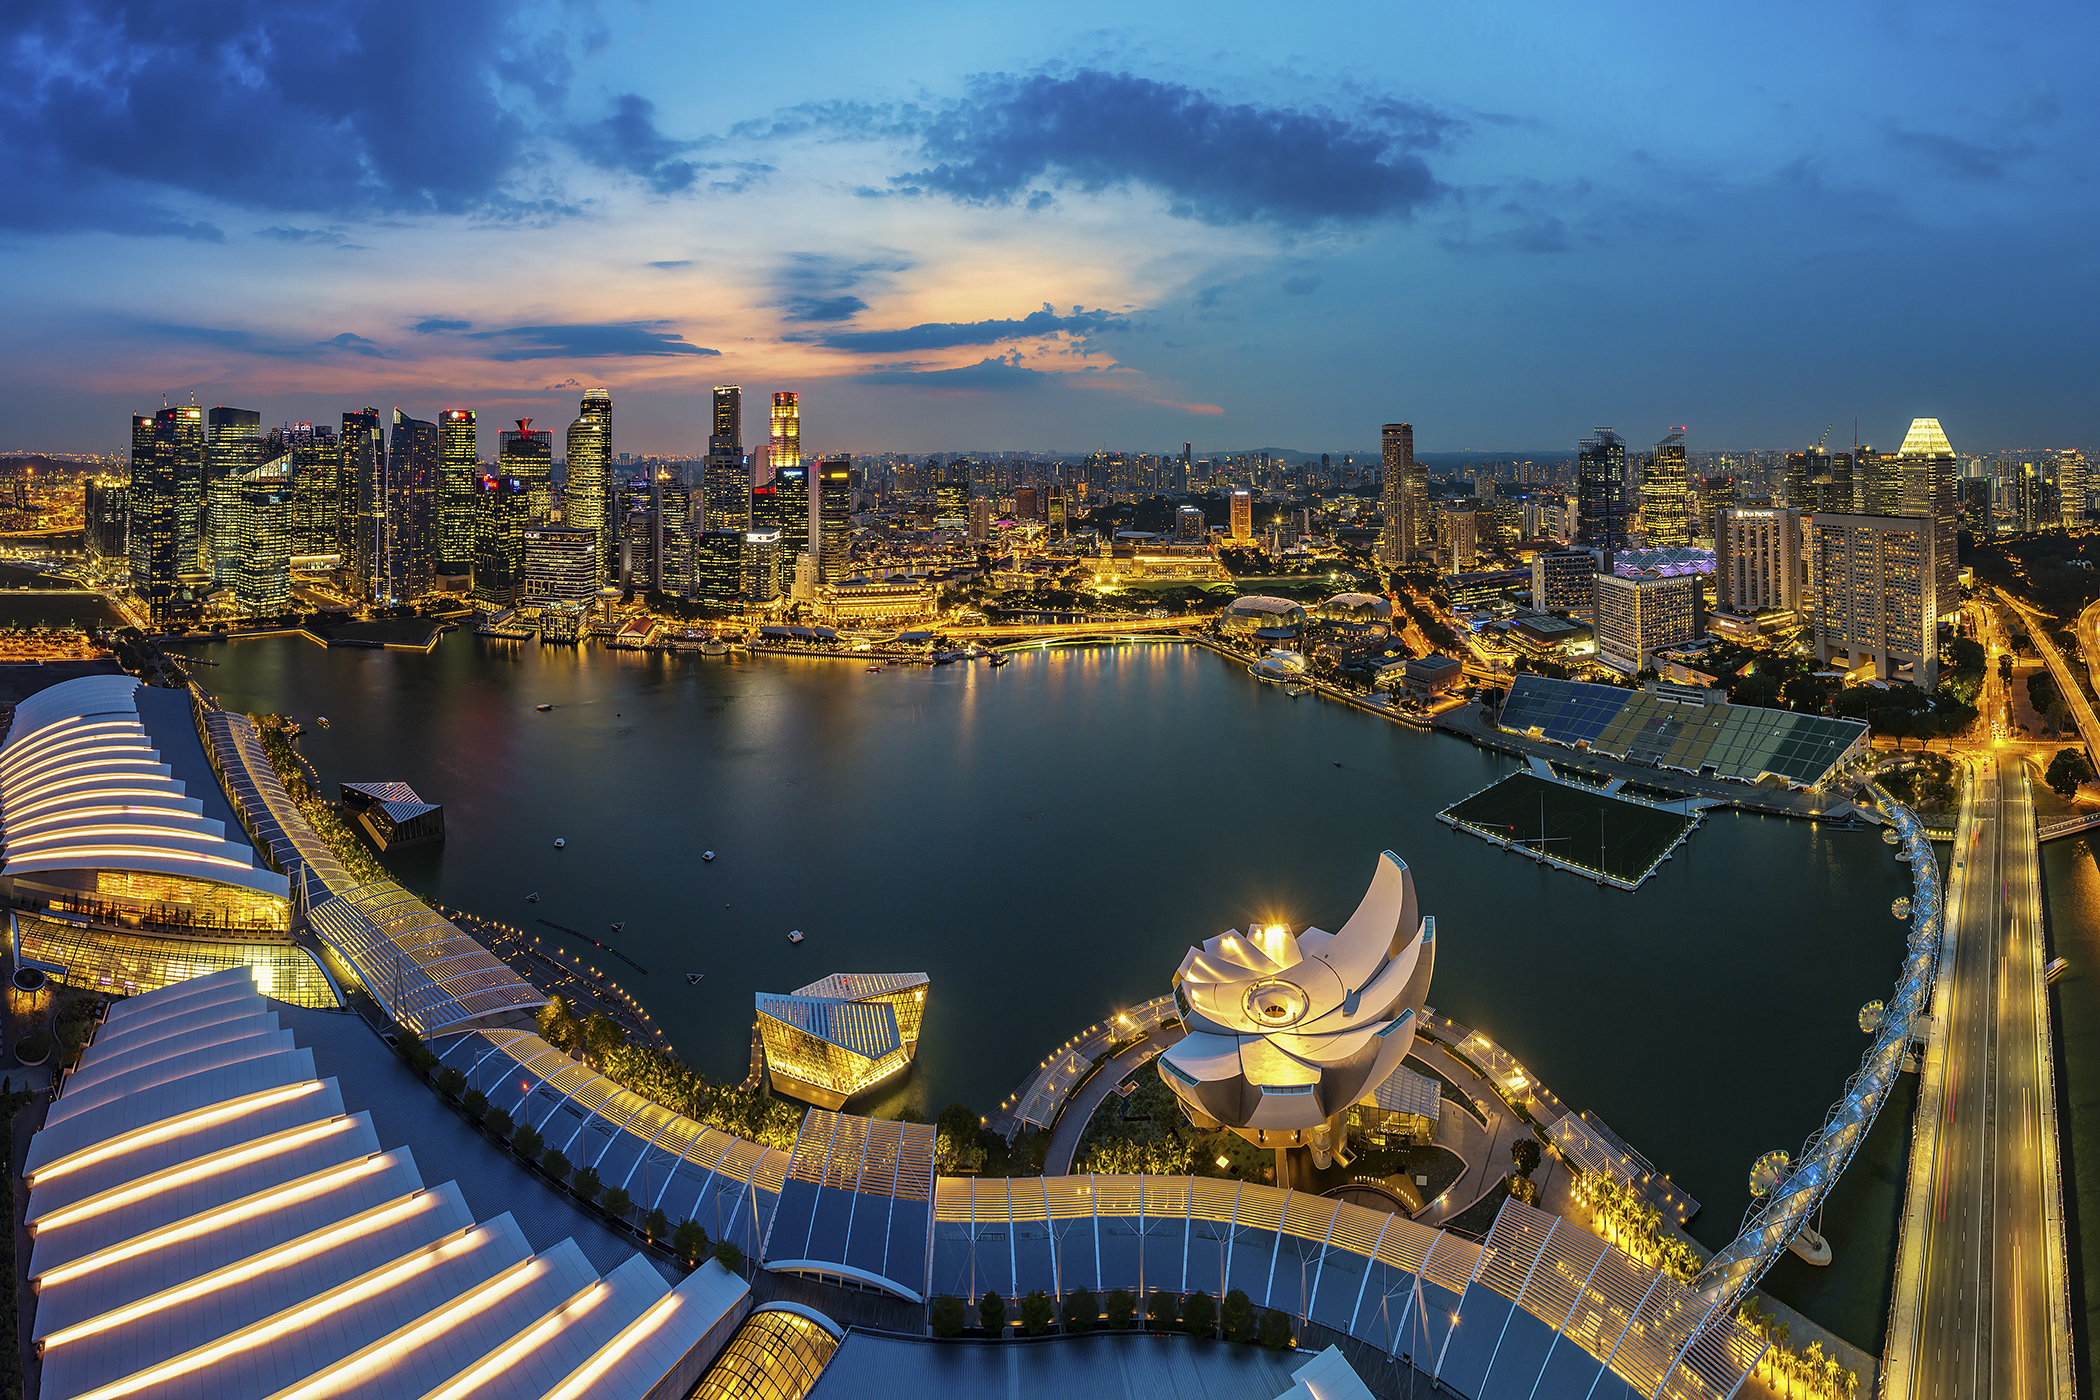 Get Best Singapore Tour Packages From Indian This SummerServicesVacation - Tour PackagesNoidaNoida Sector 10